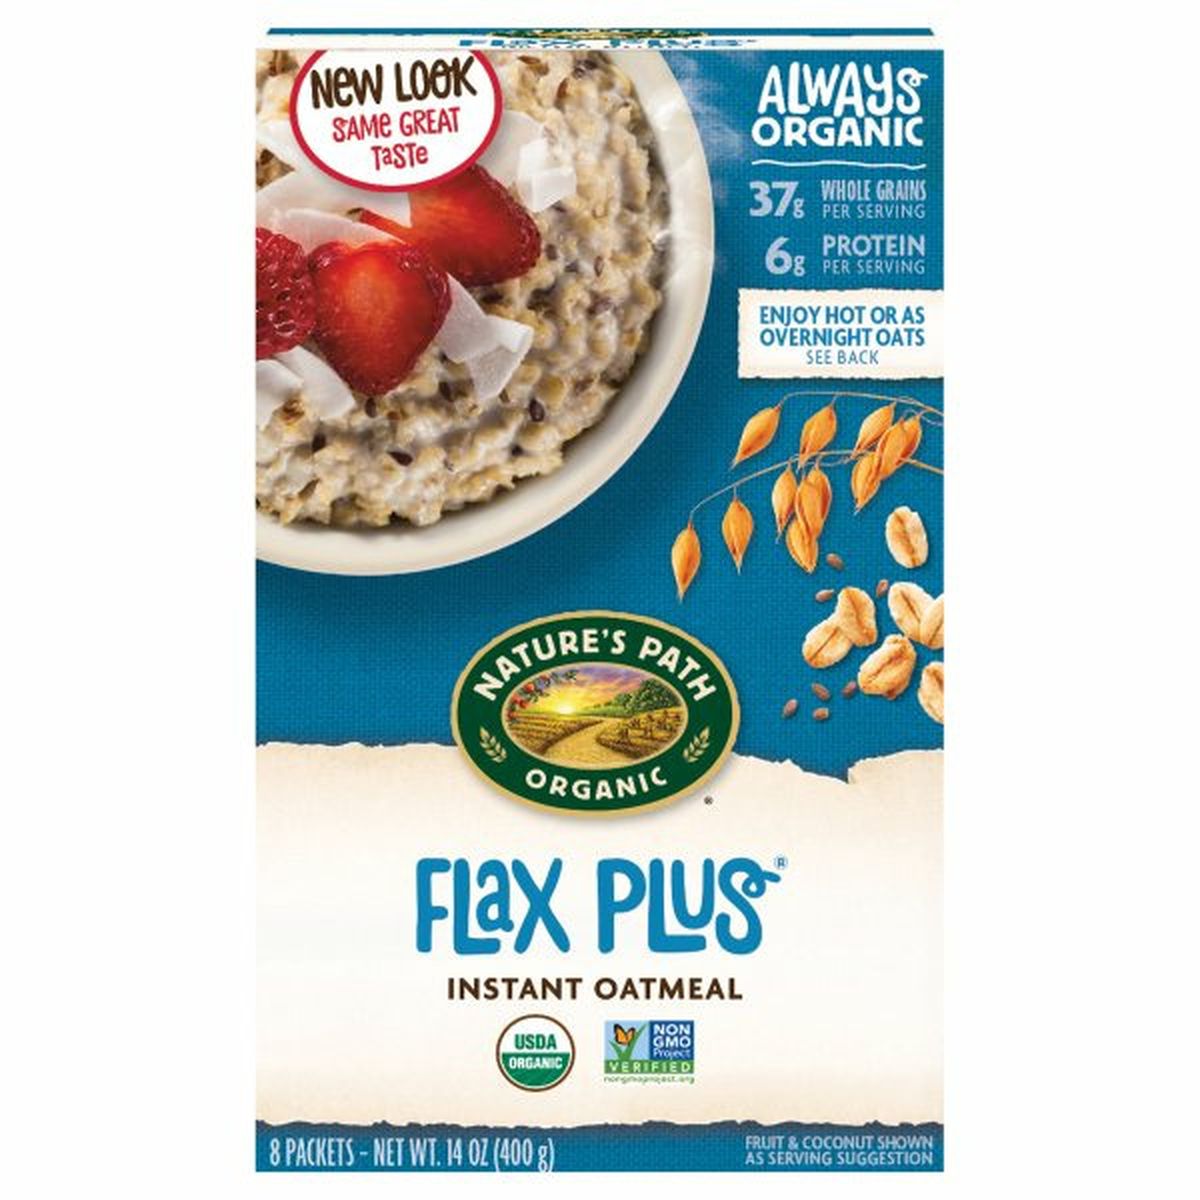 Calories in Nature's Path Instant Oatmeal, Flax Plus